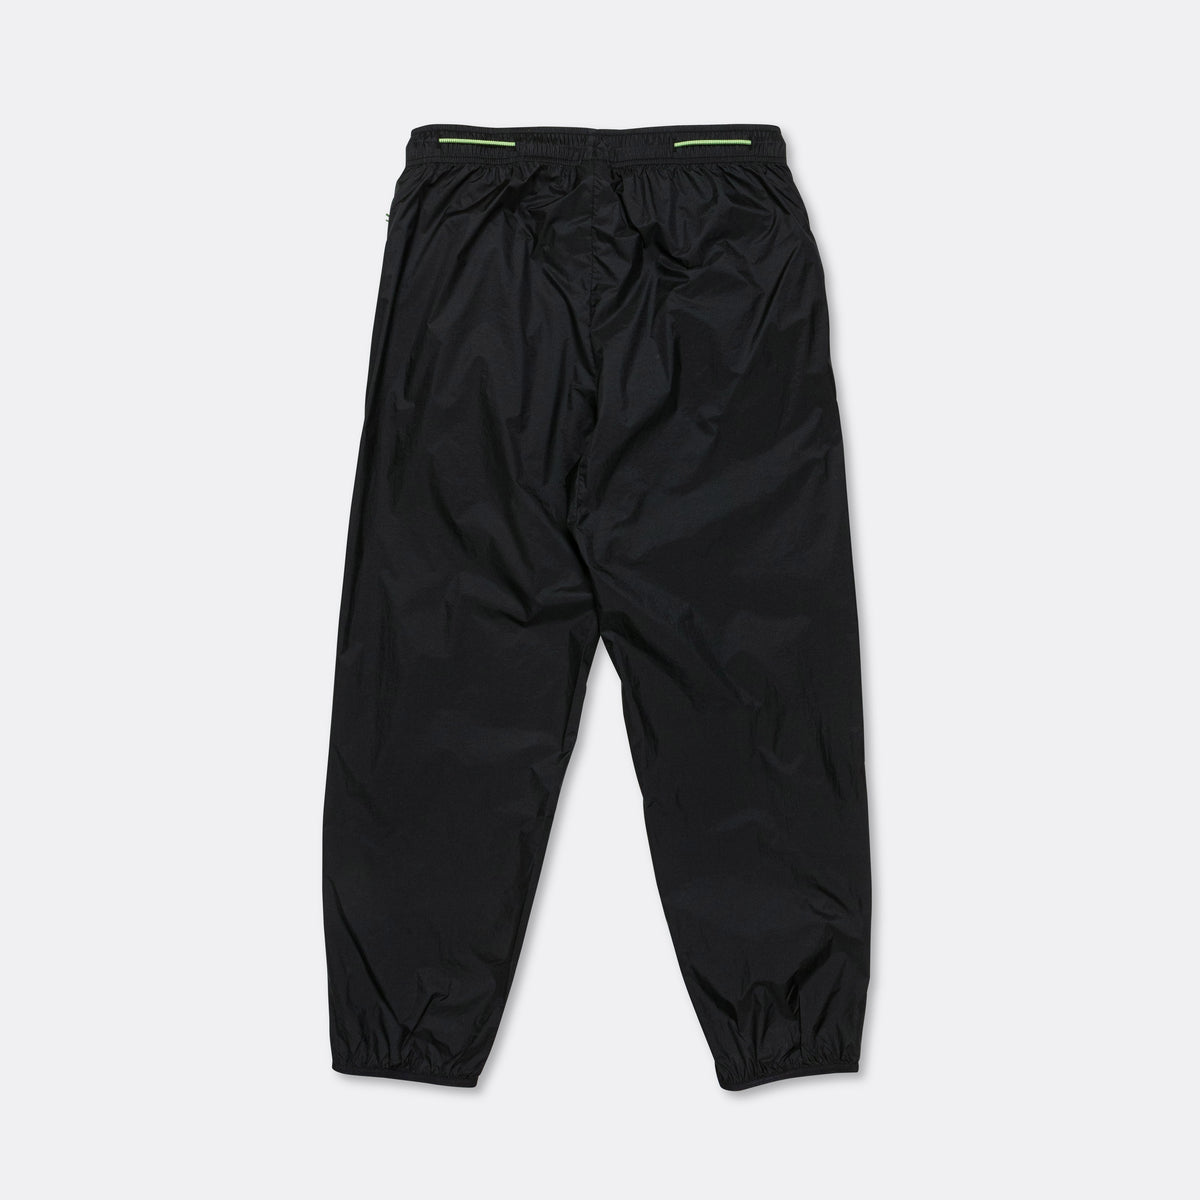 Nike ACG 'Cinder Cone' Windshell Pant - Black/Lime Blast | UP THERE